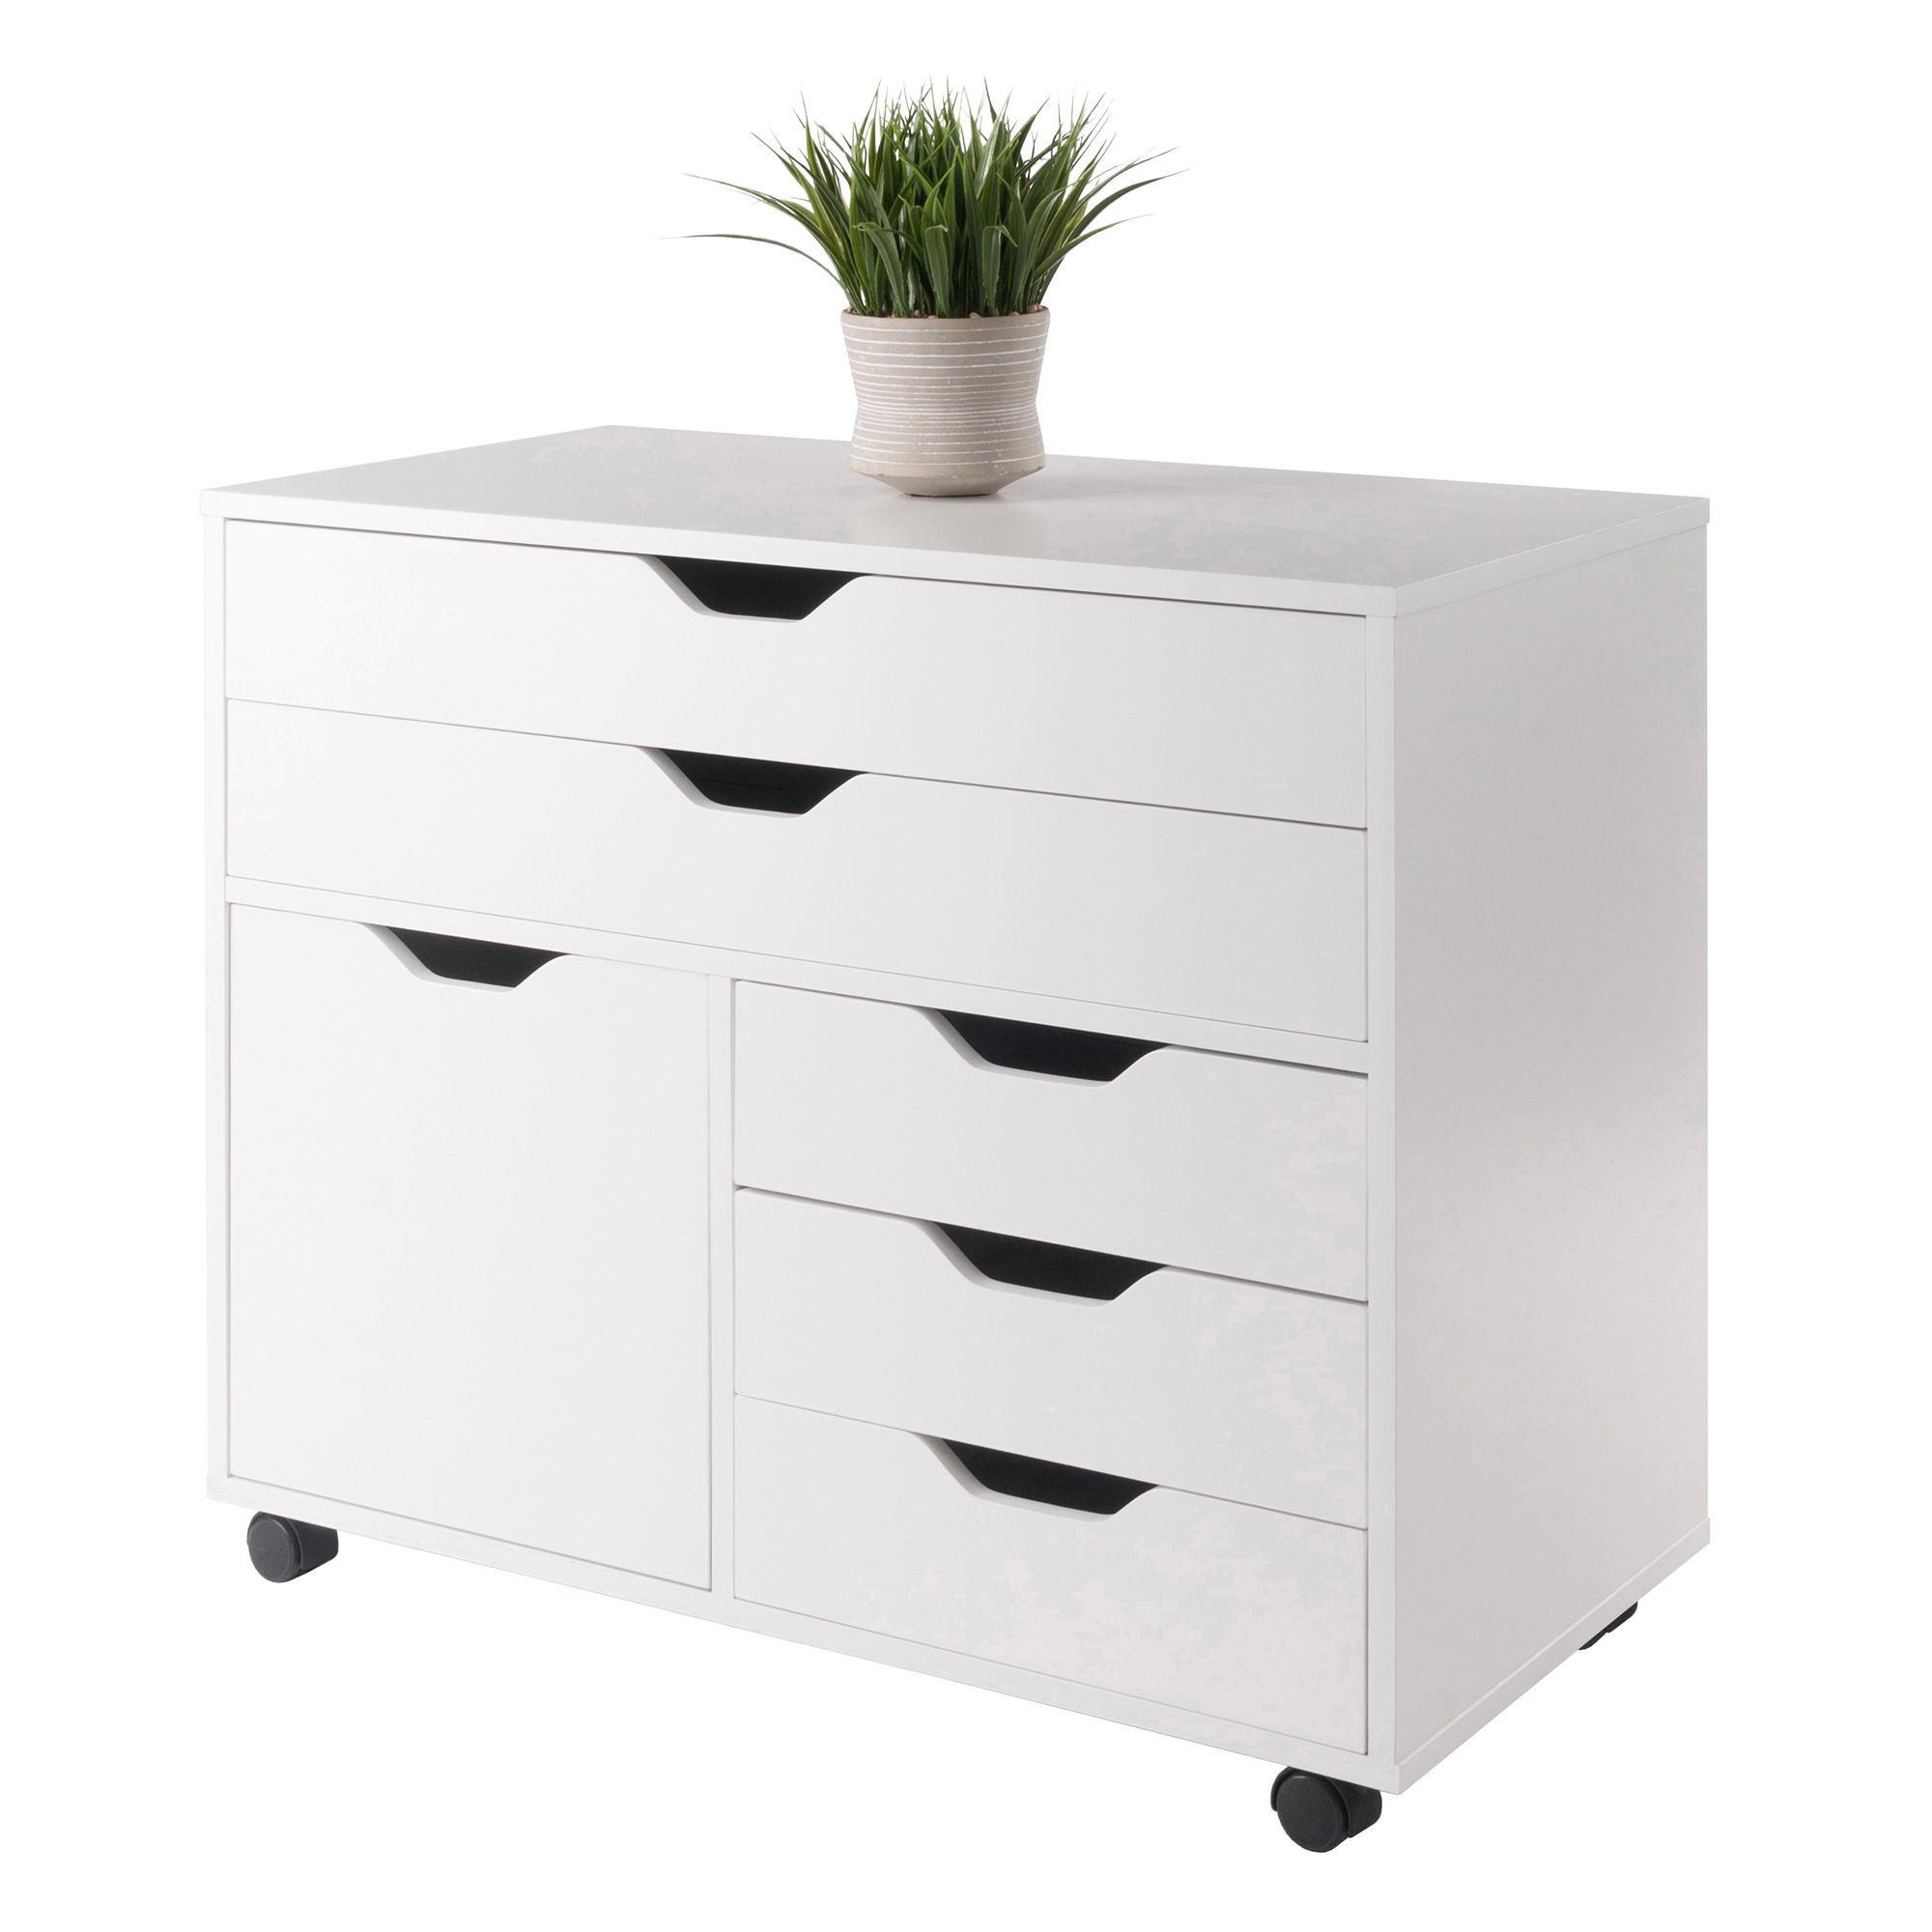 Winsome 3-Section Mobile Storage Cabinet, White Finish - Walmart.com